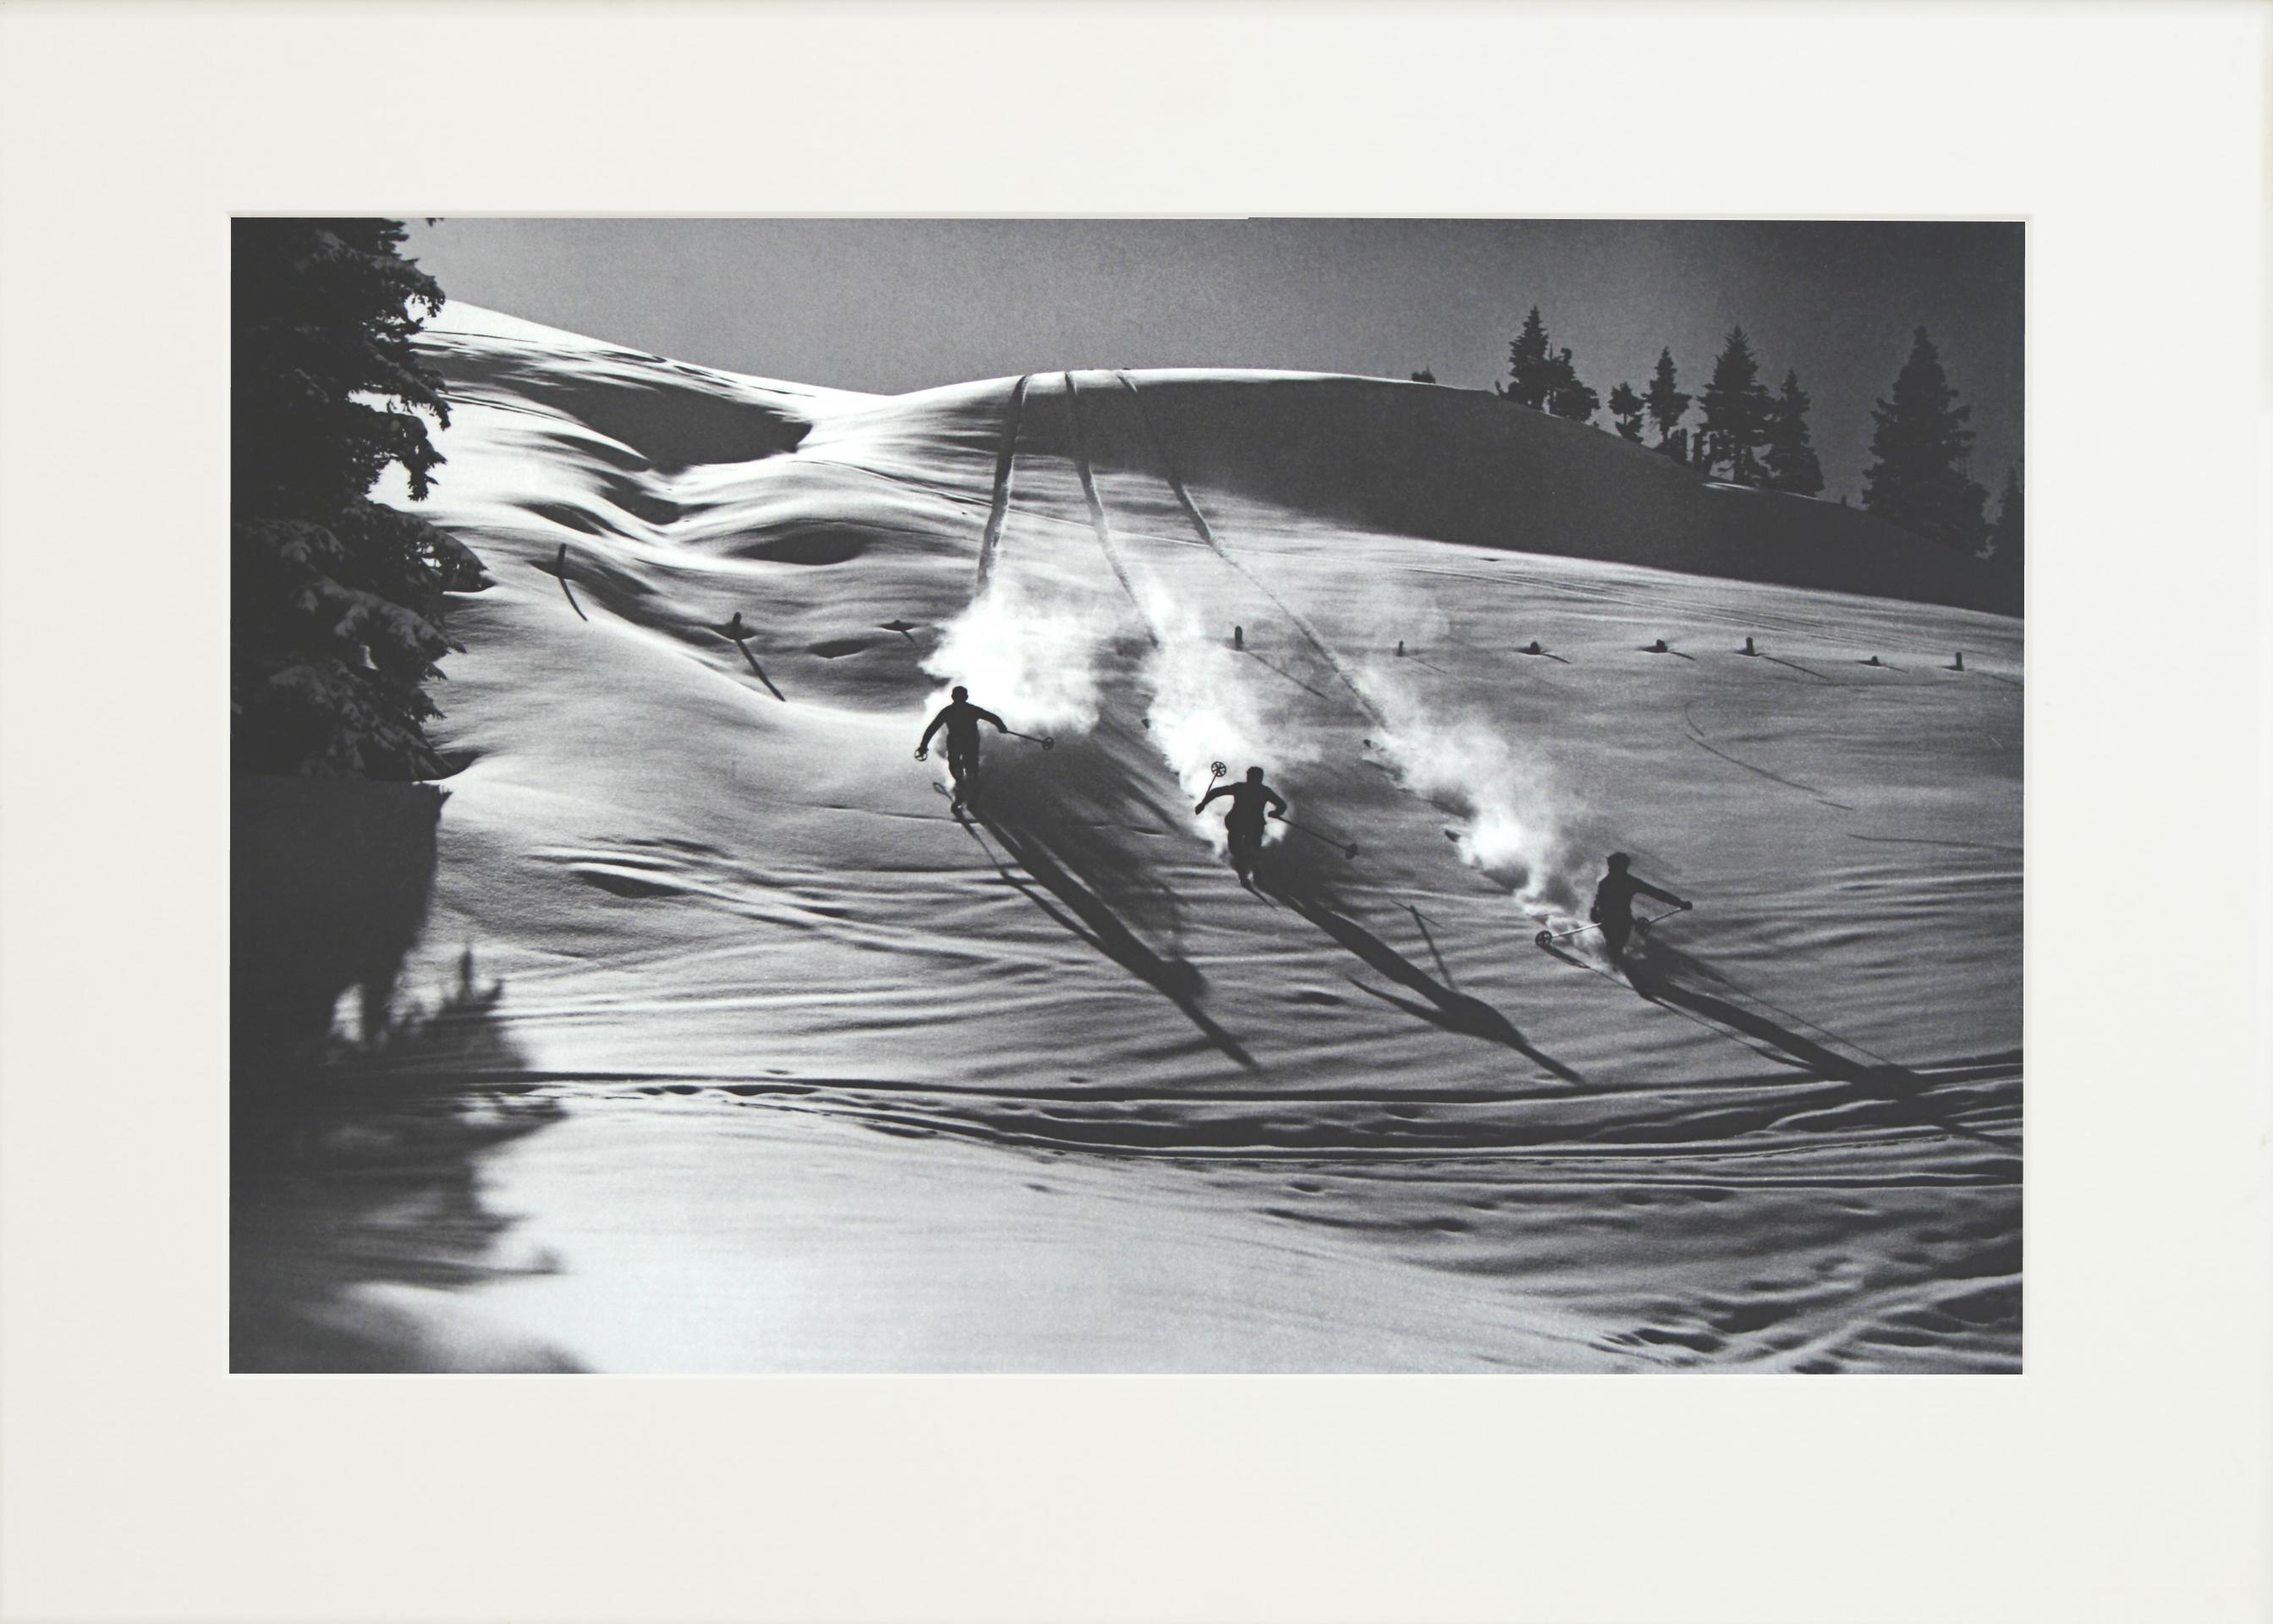 Alpine Ski Photograph.
'Descent in Powder', a new mounted black and white photographic image after an original 1930s skiing photograph. Black and white alpine photos are the perfect addition to any home or ski lodge, so please do check out our